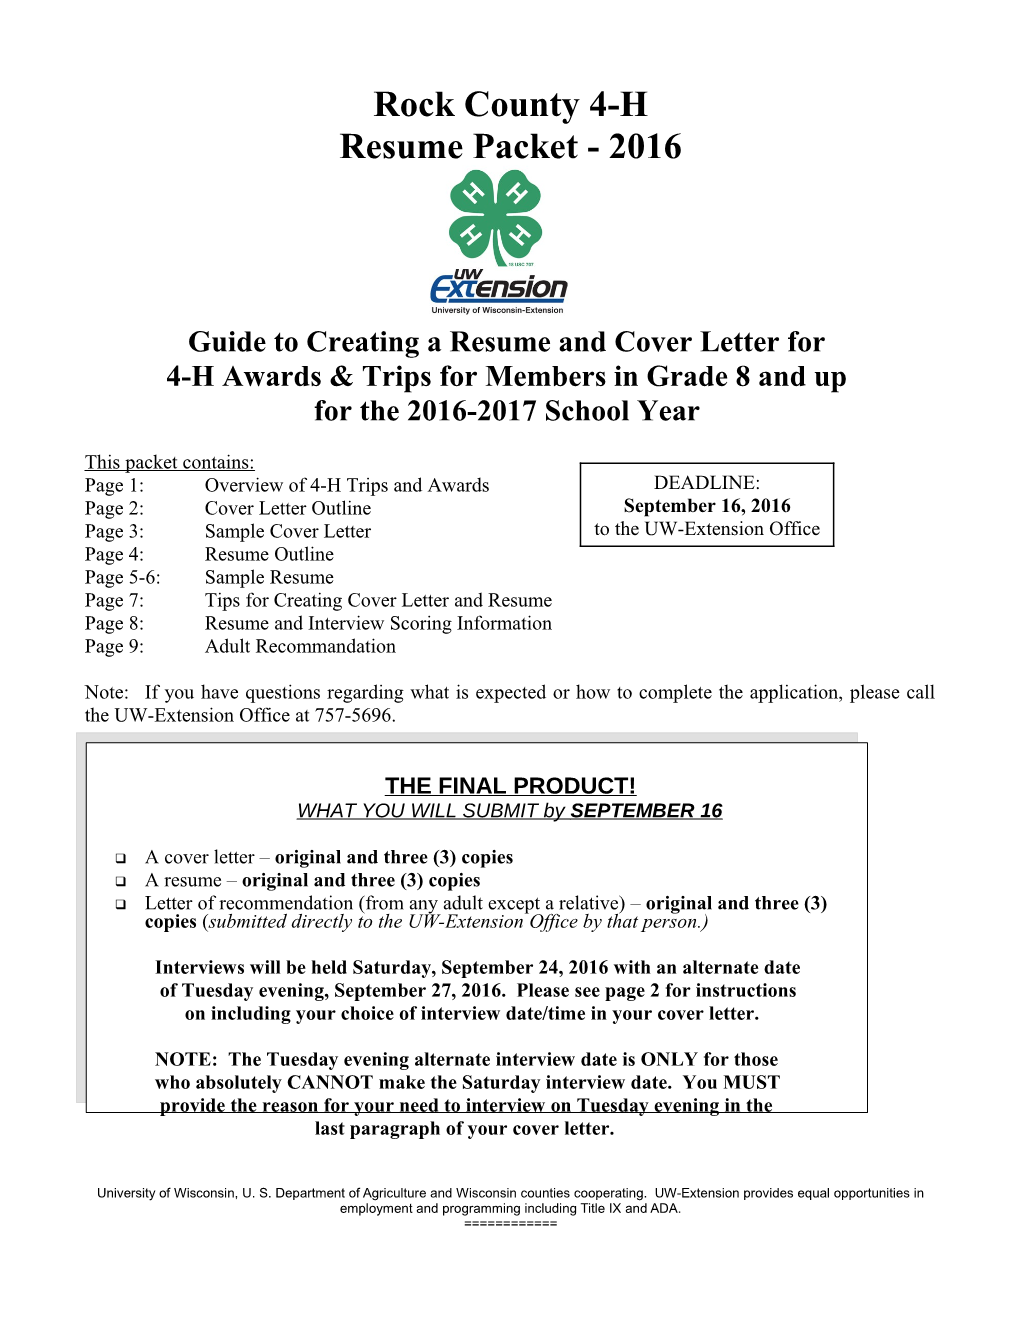 Guide to Creating a Resume and Cover Letter For